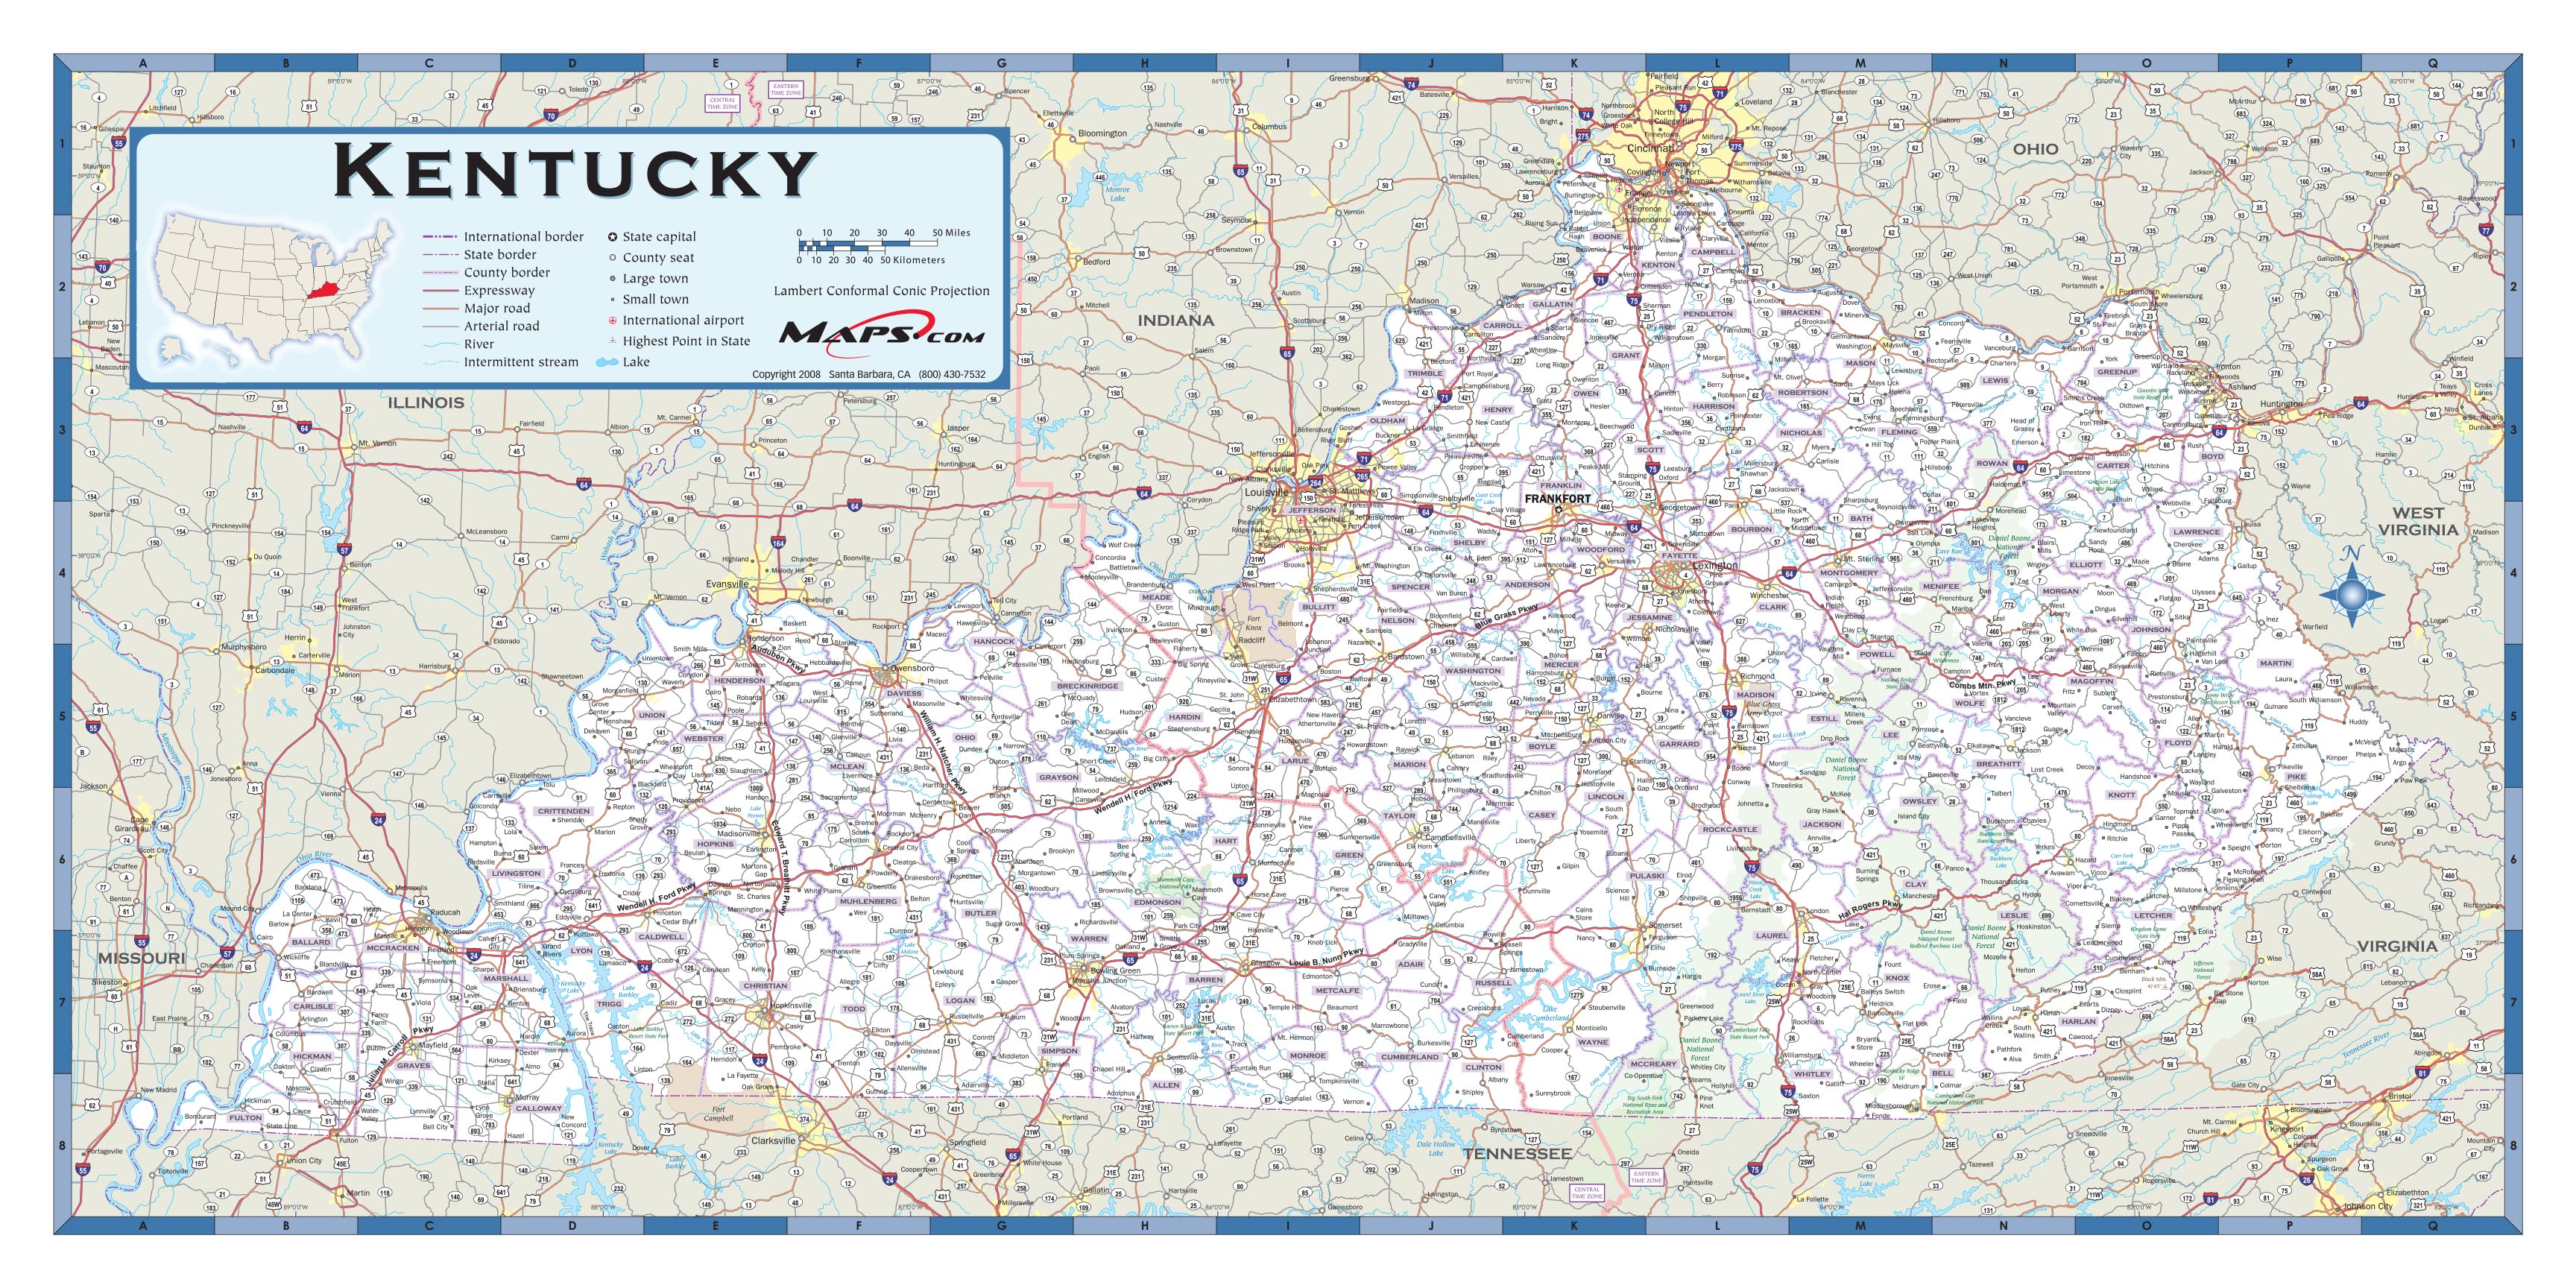 Kentucky County Map With Roads